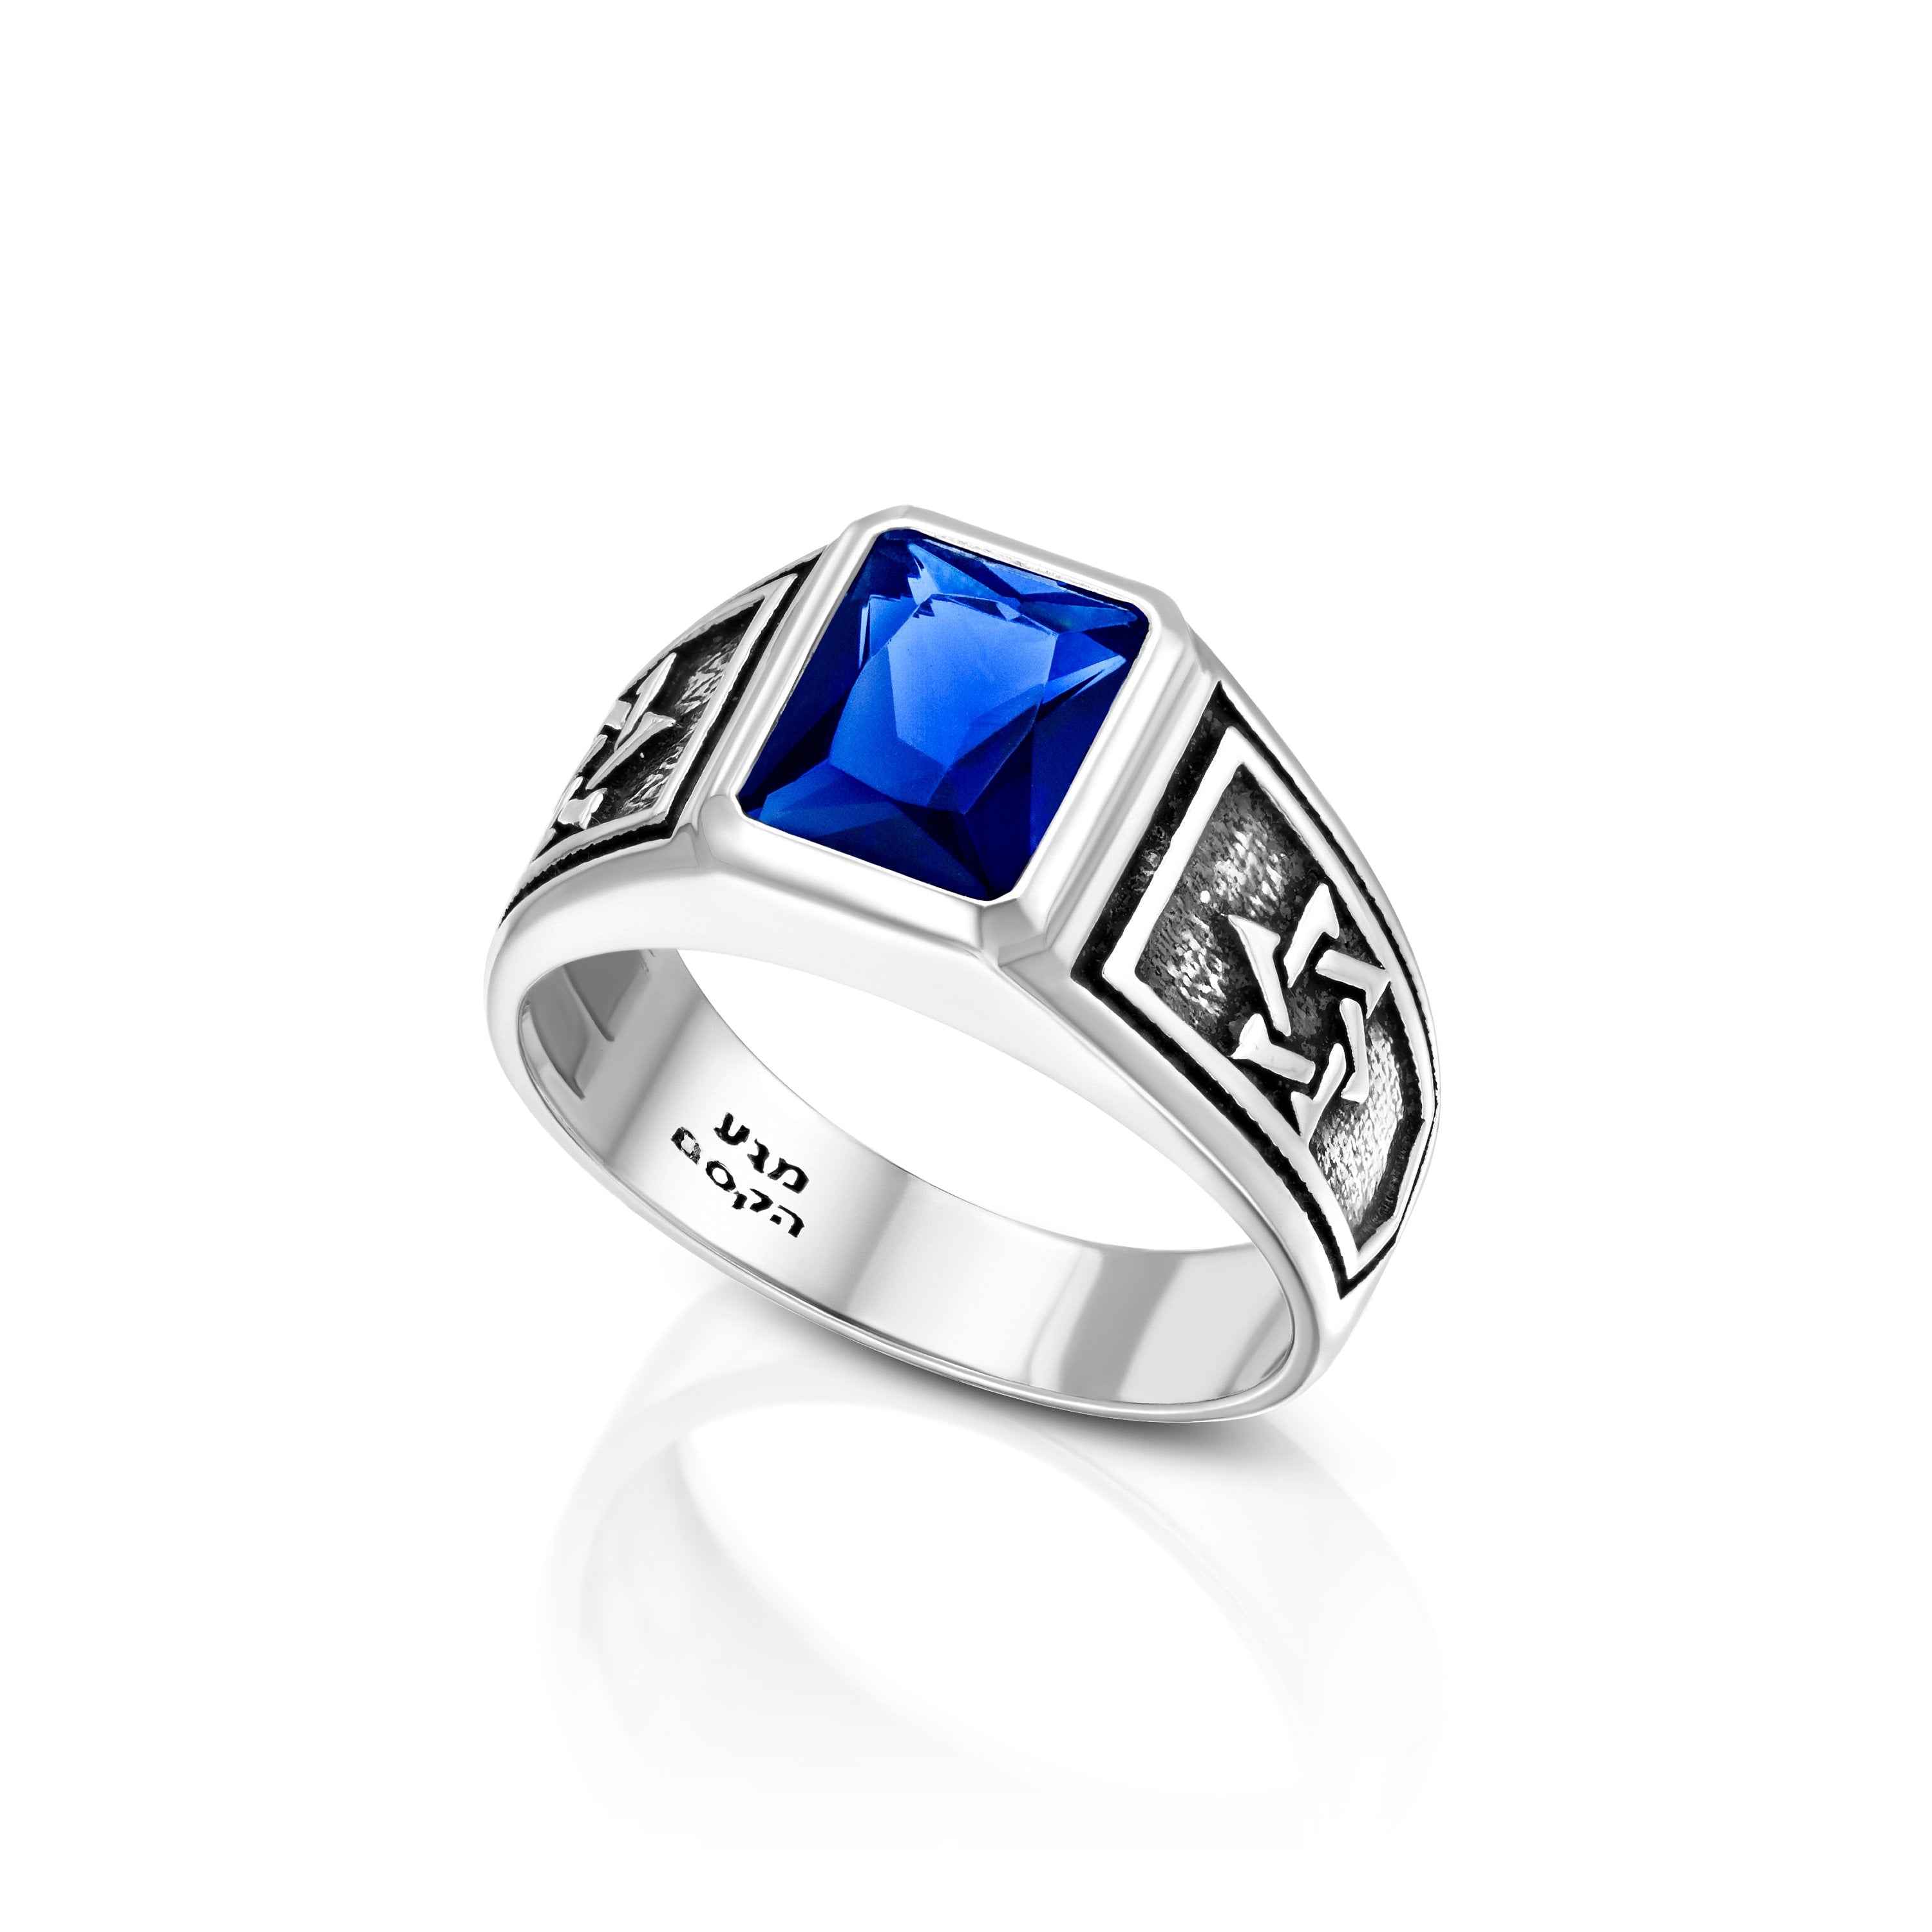 Sterling Silver and Royal Blue Zircon, Men's Star of David College Ring - Rectangle Royal Blue Zircon